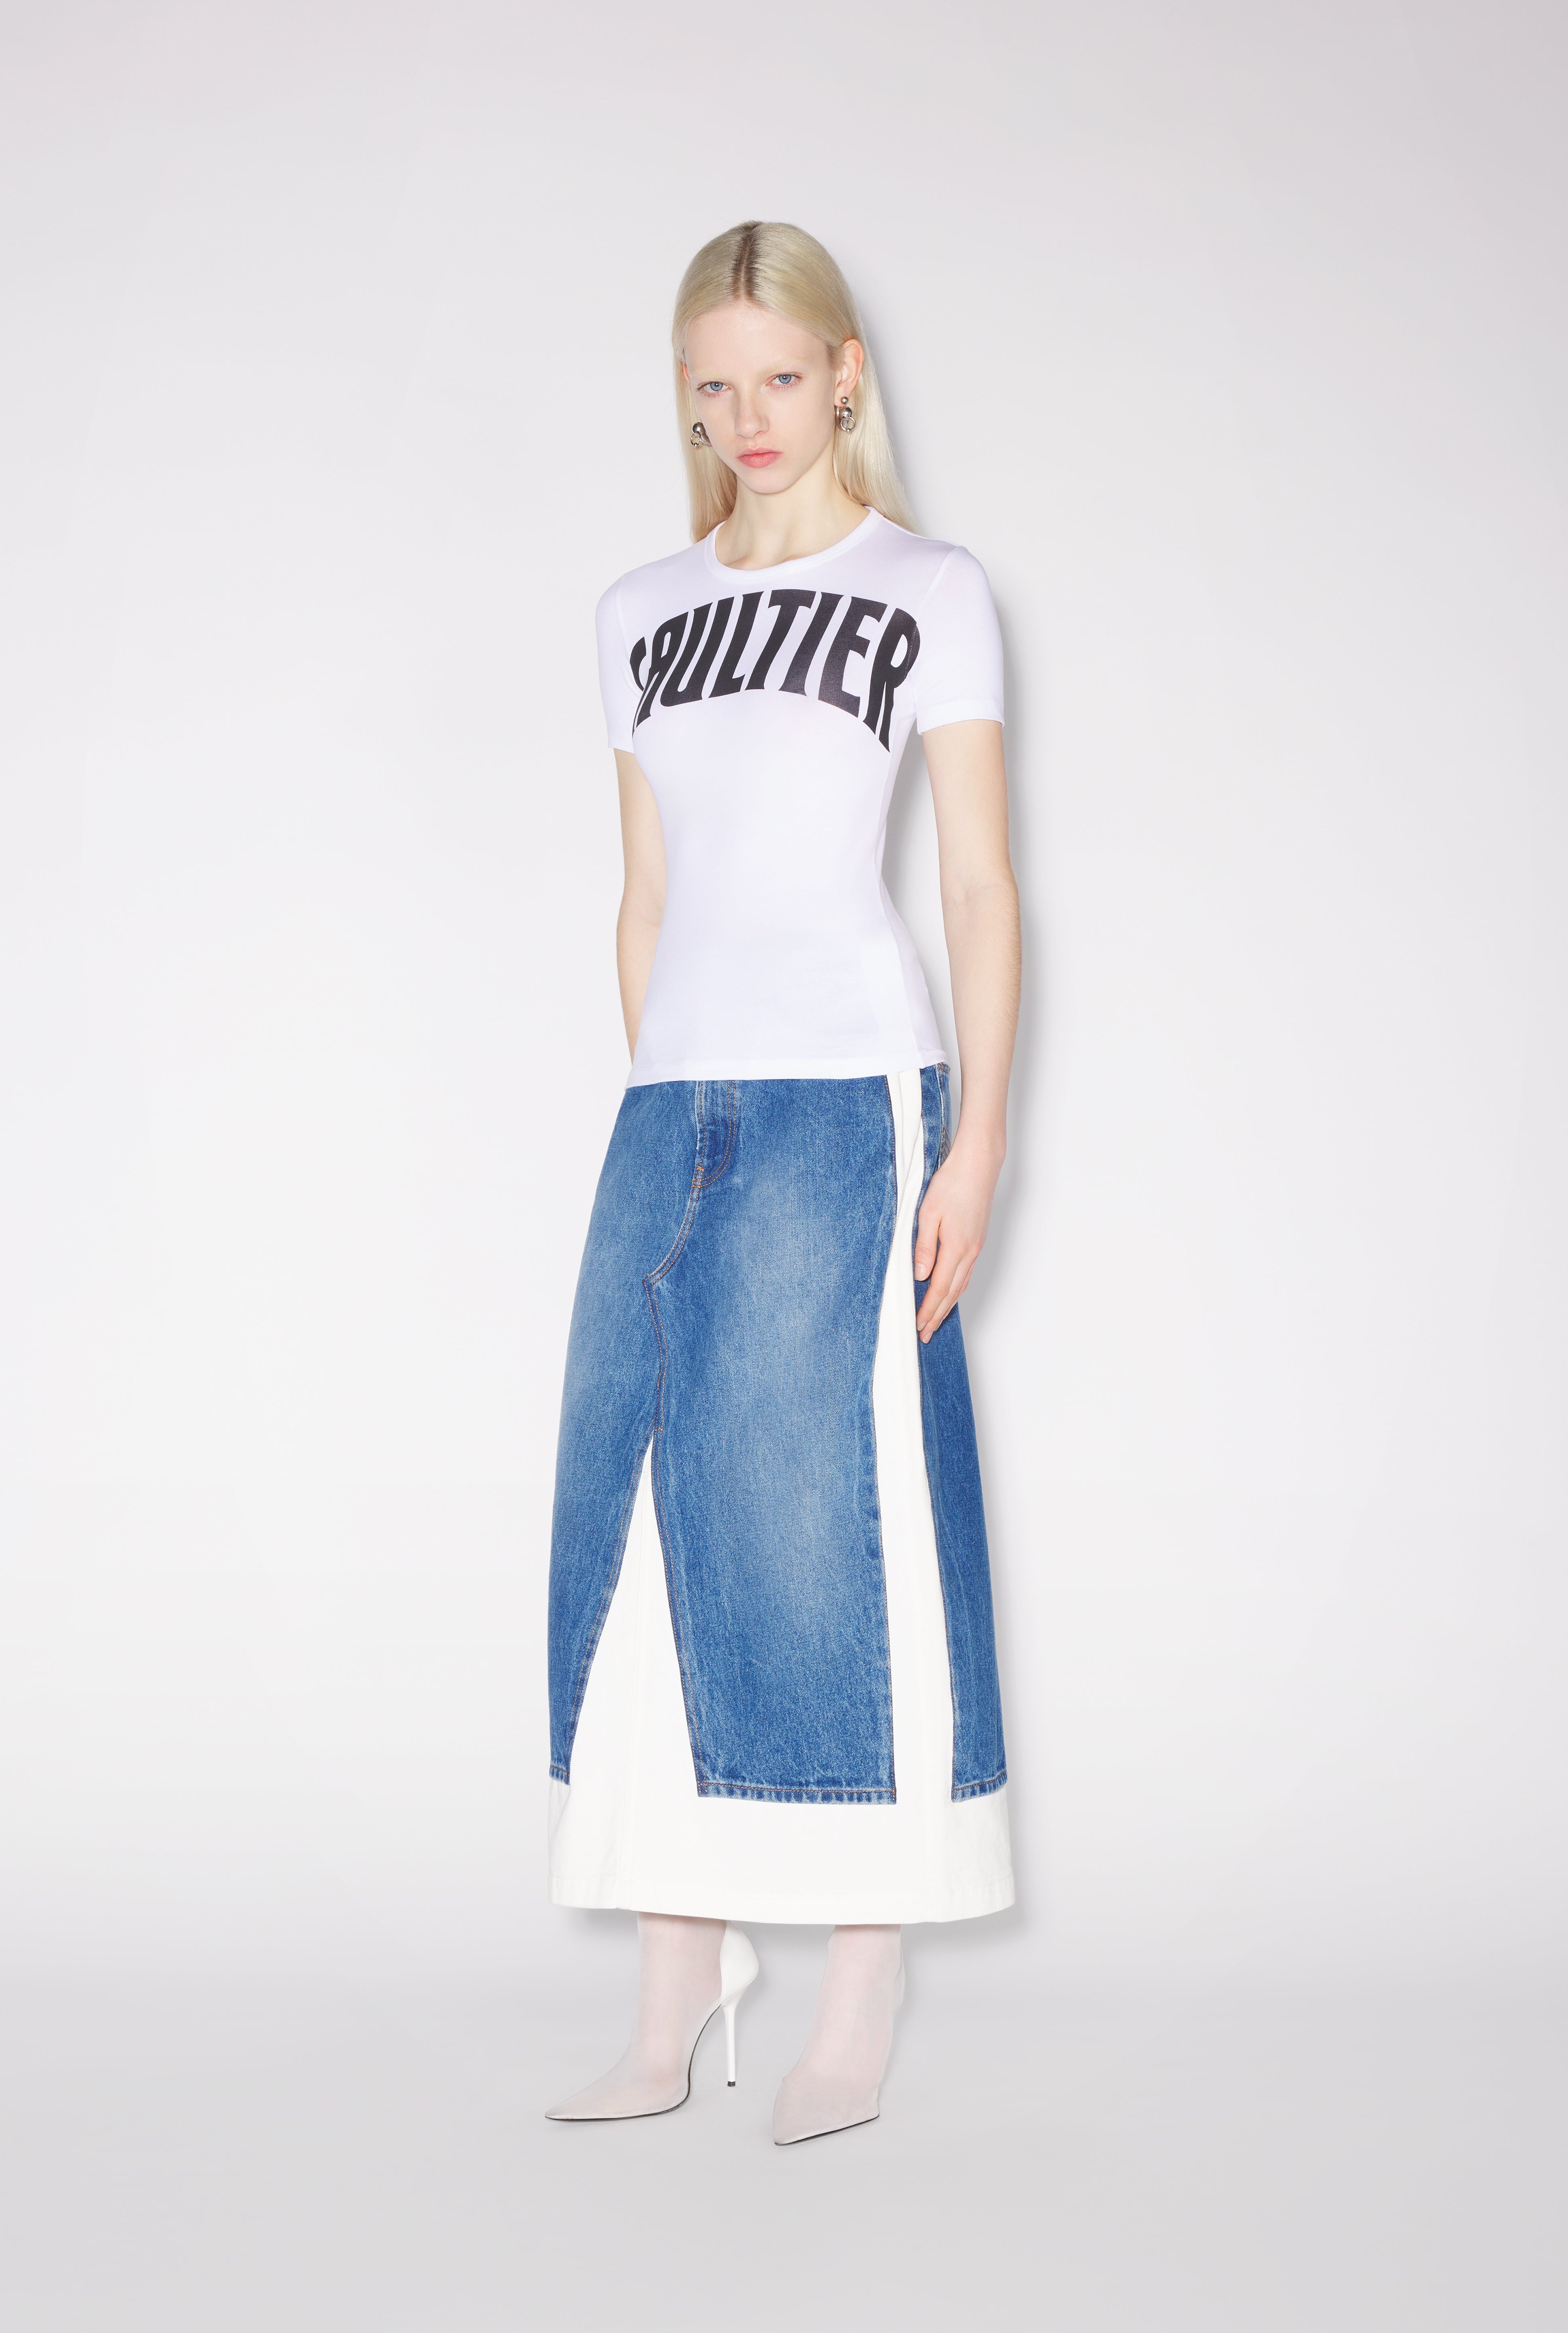 THE WHITE GAULTIER T-SHIRT - 2